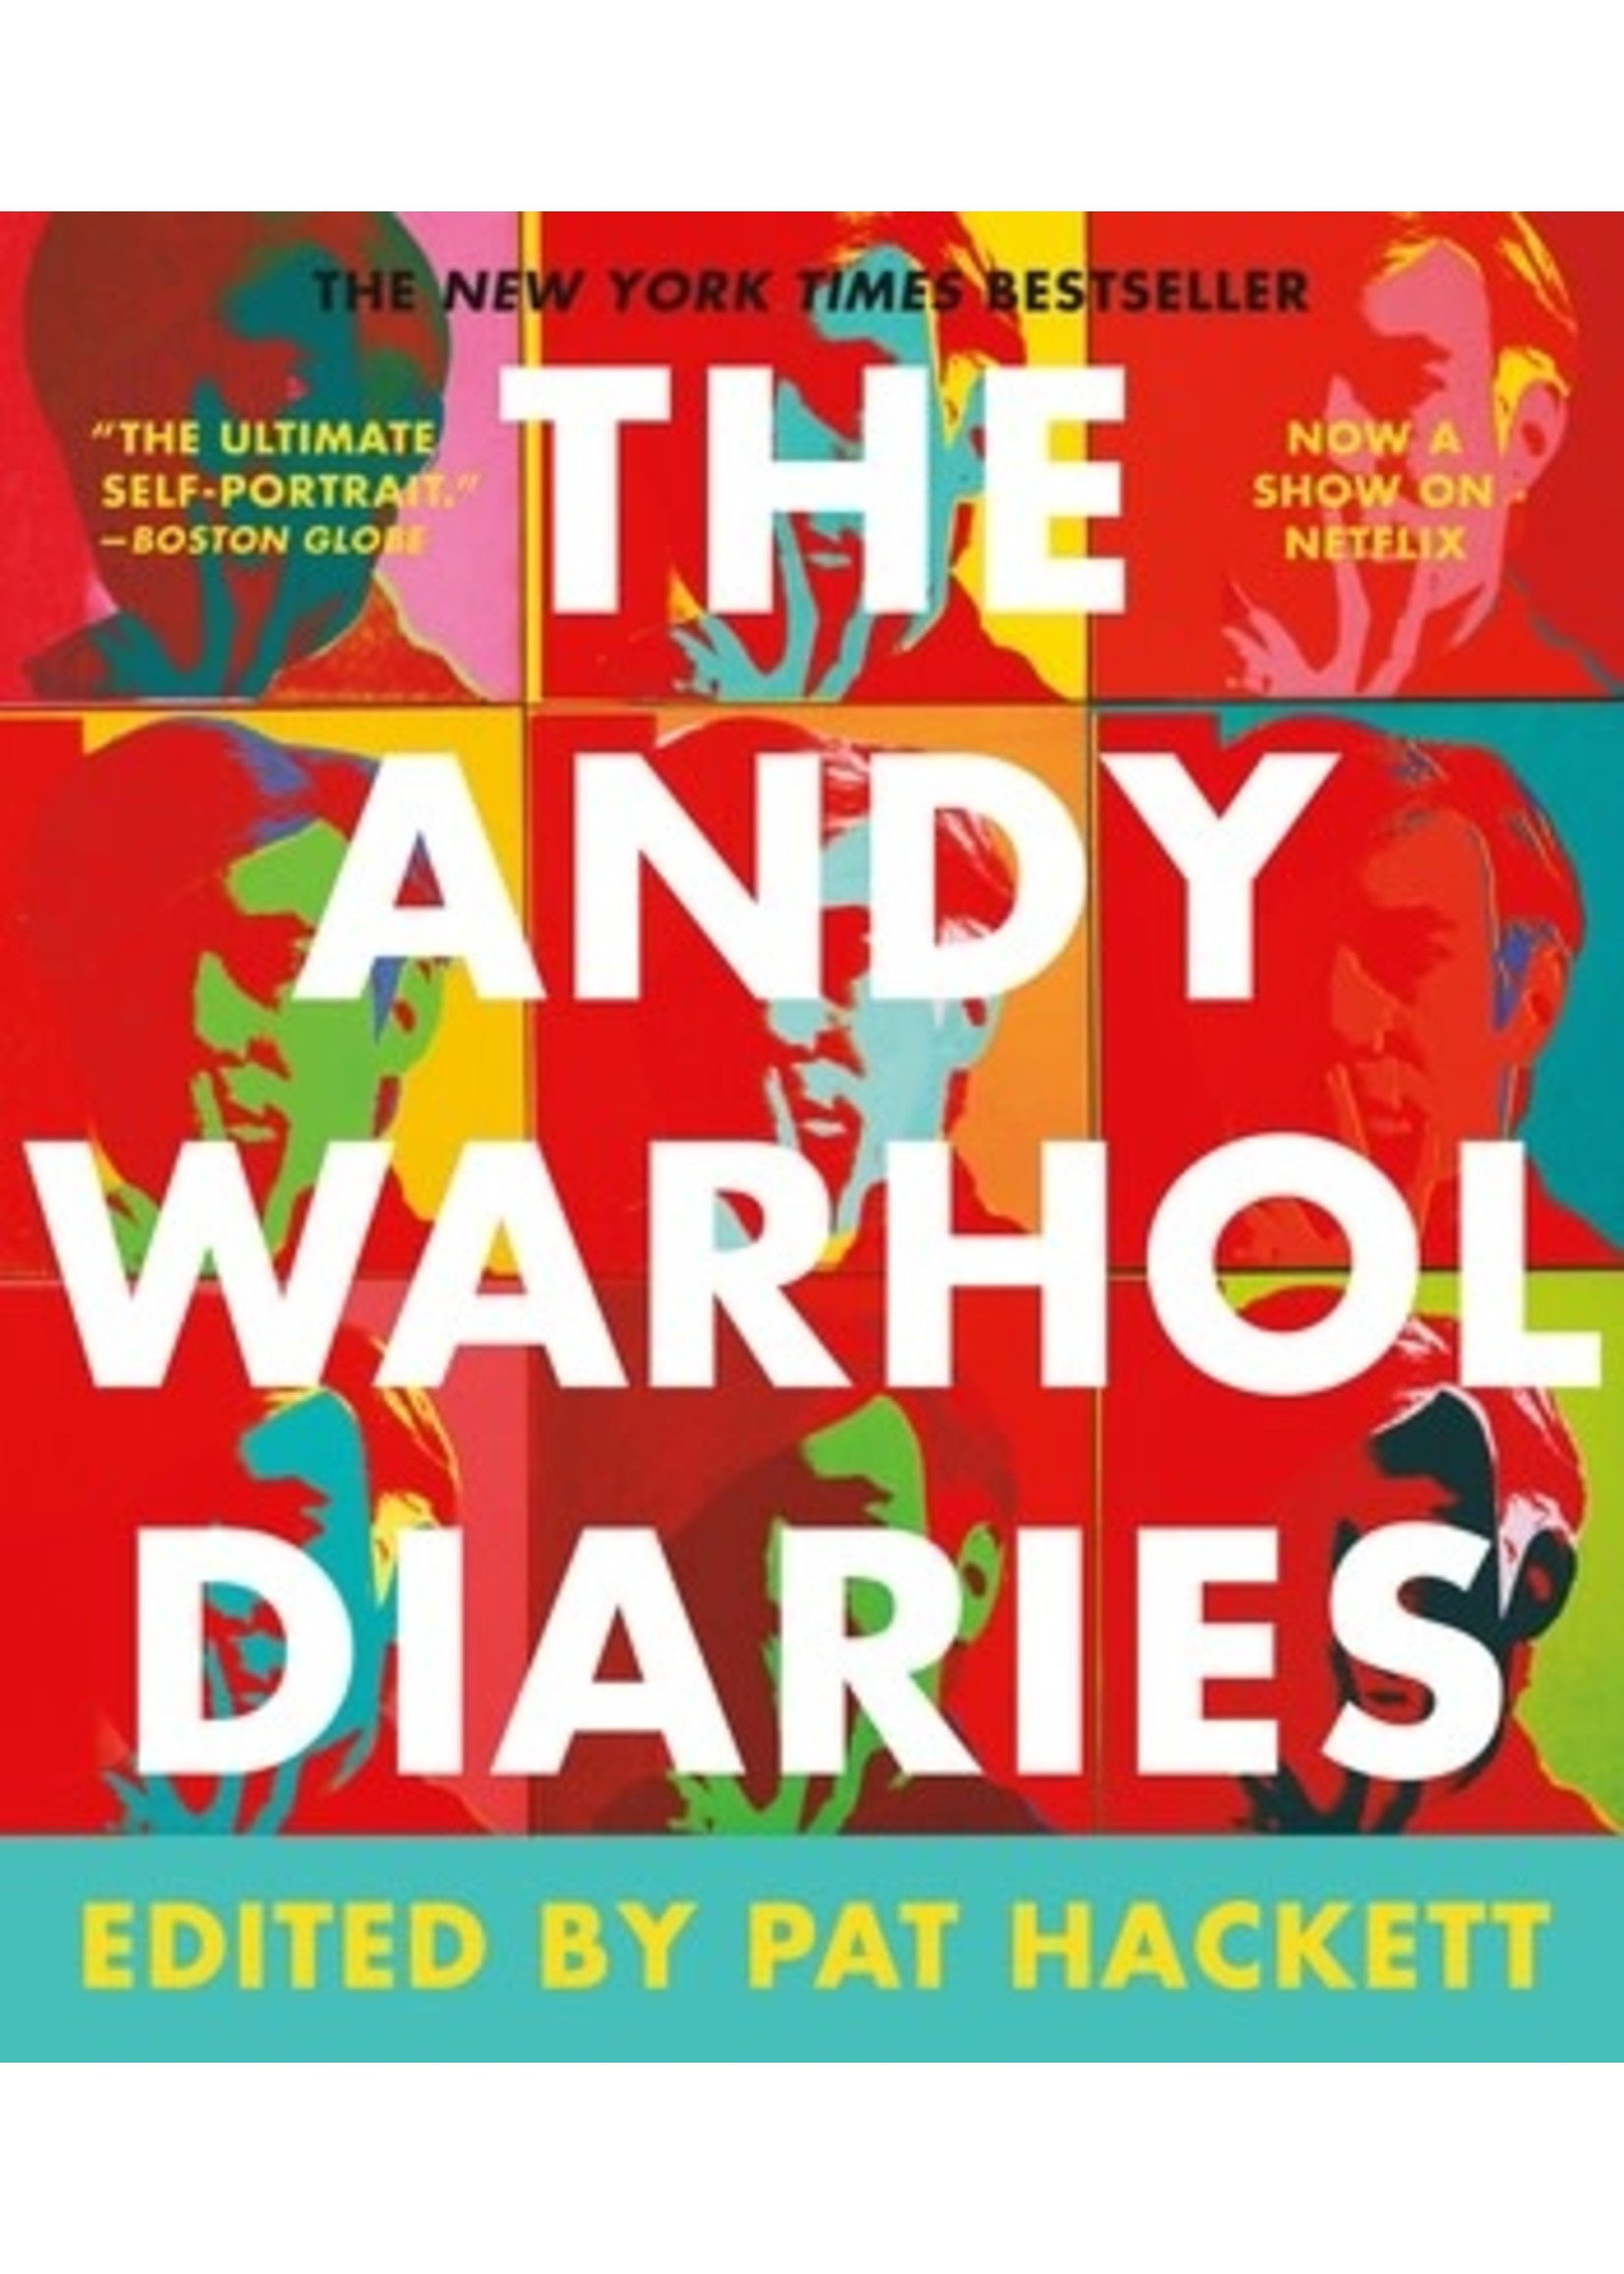 The Andy Warhol Diaries by Andy Warhol, Pat Hackett